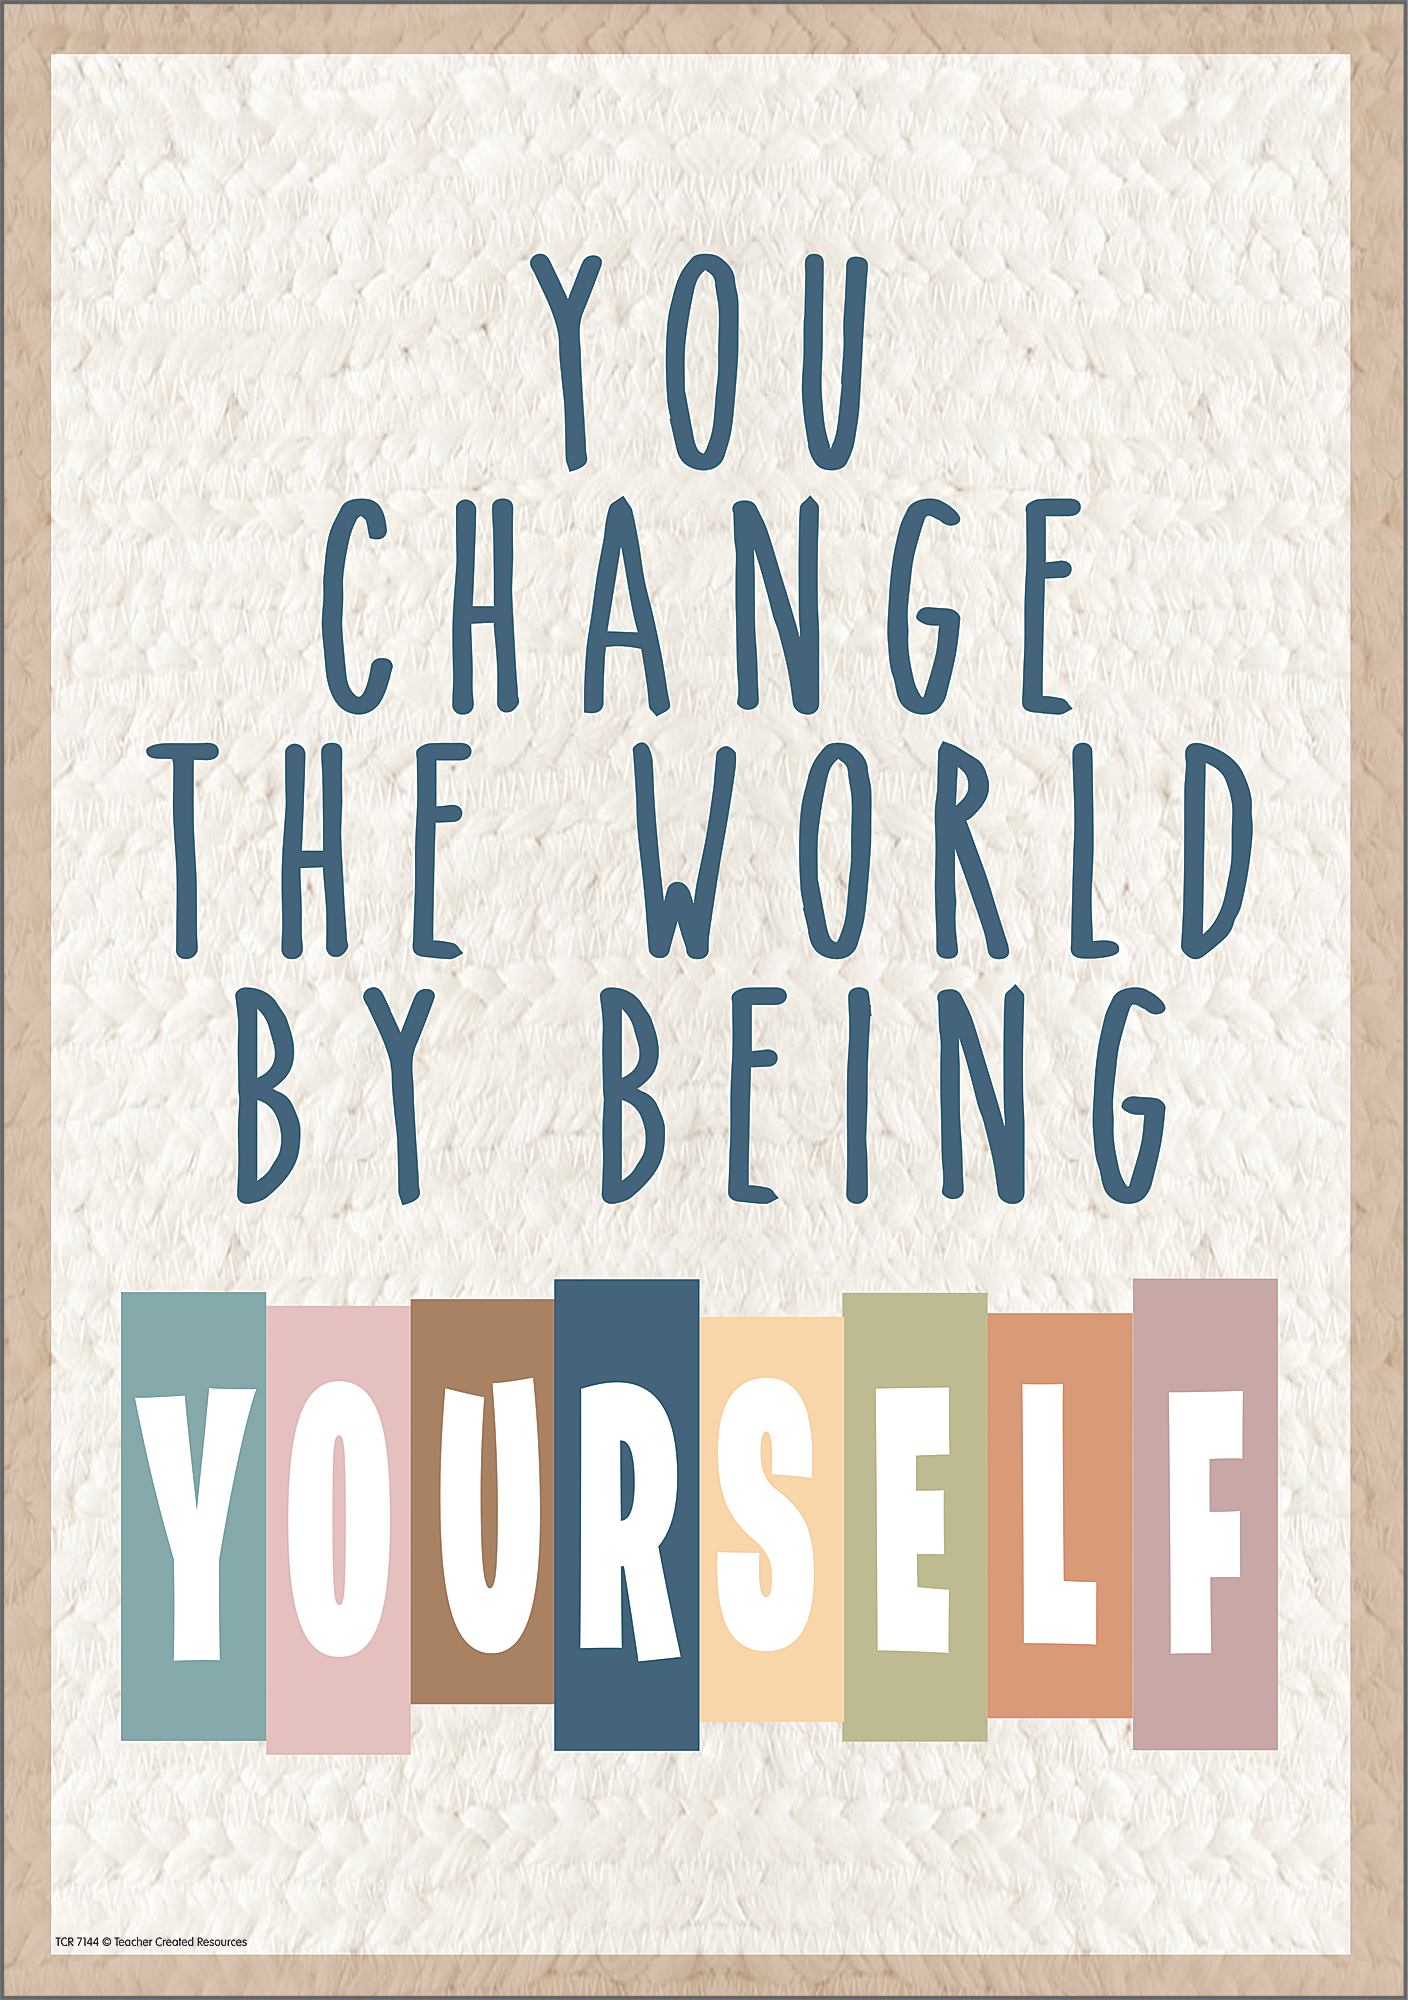 You Change the World by Being Yourself Positive Poster